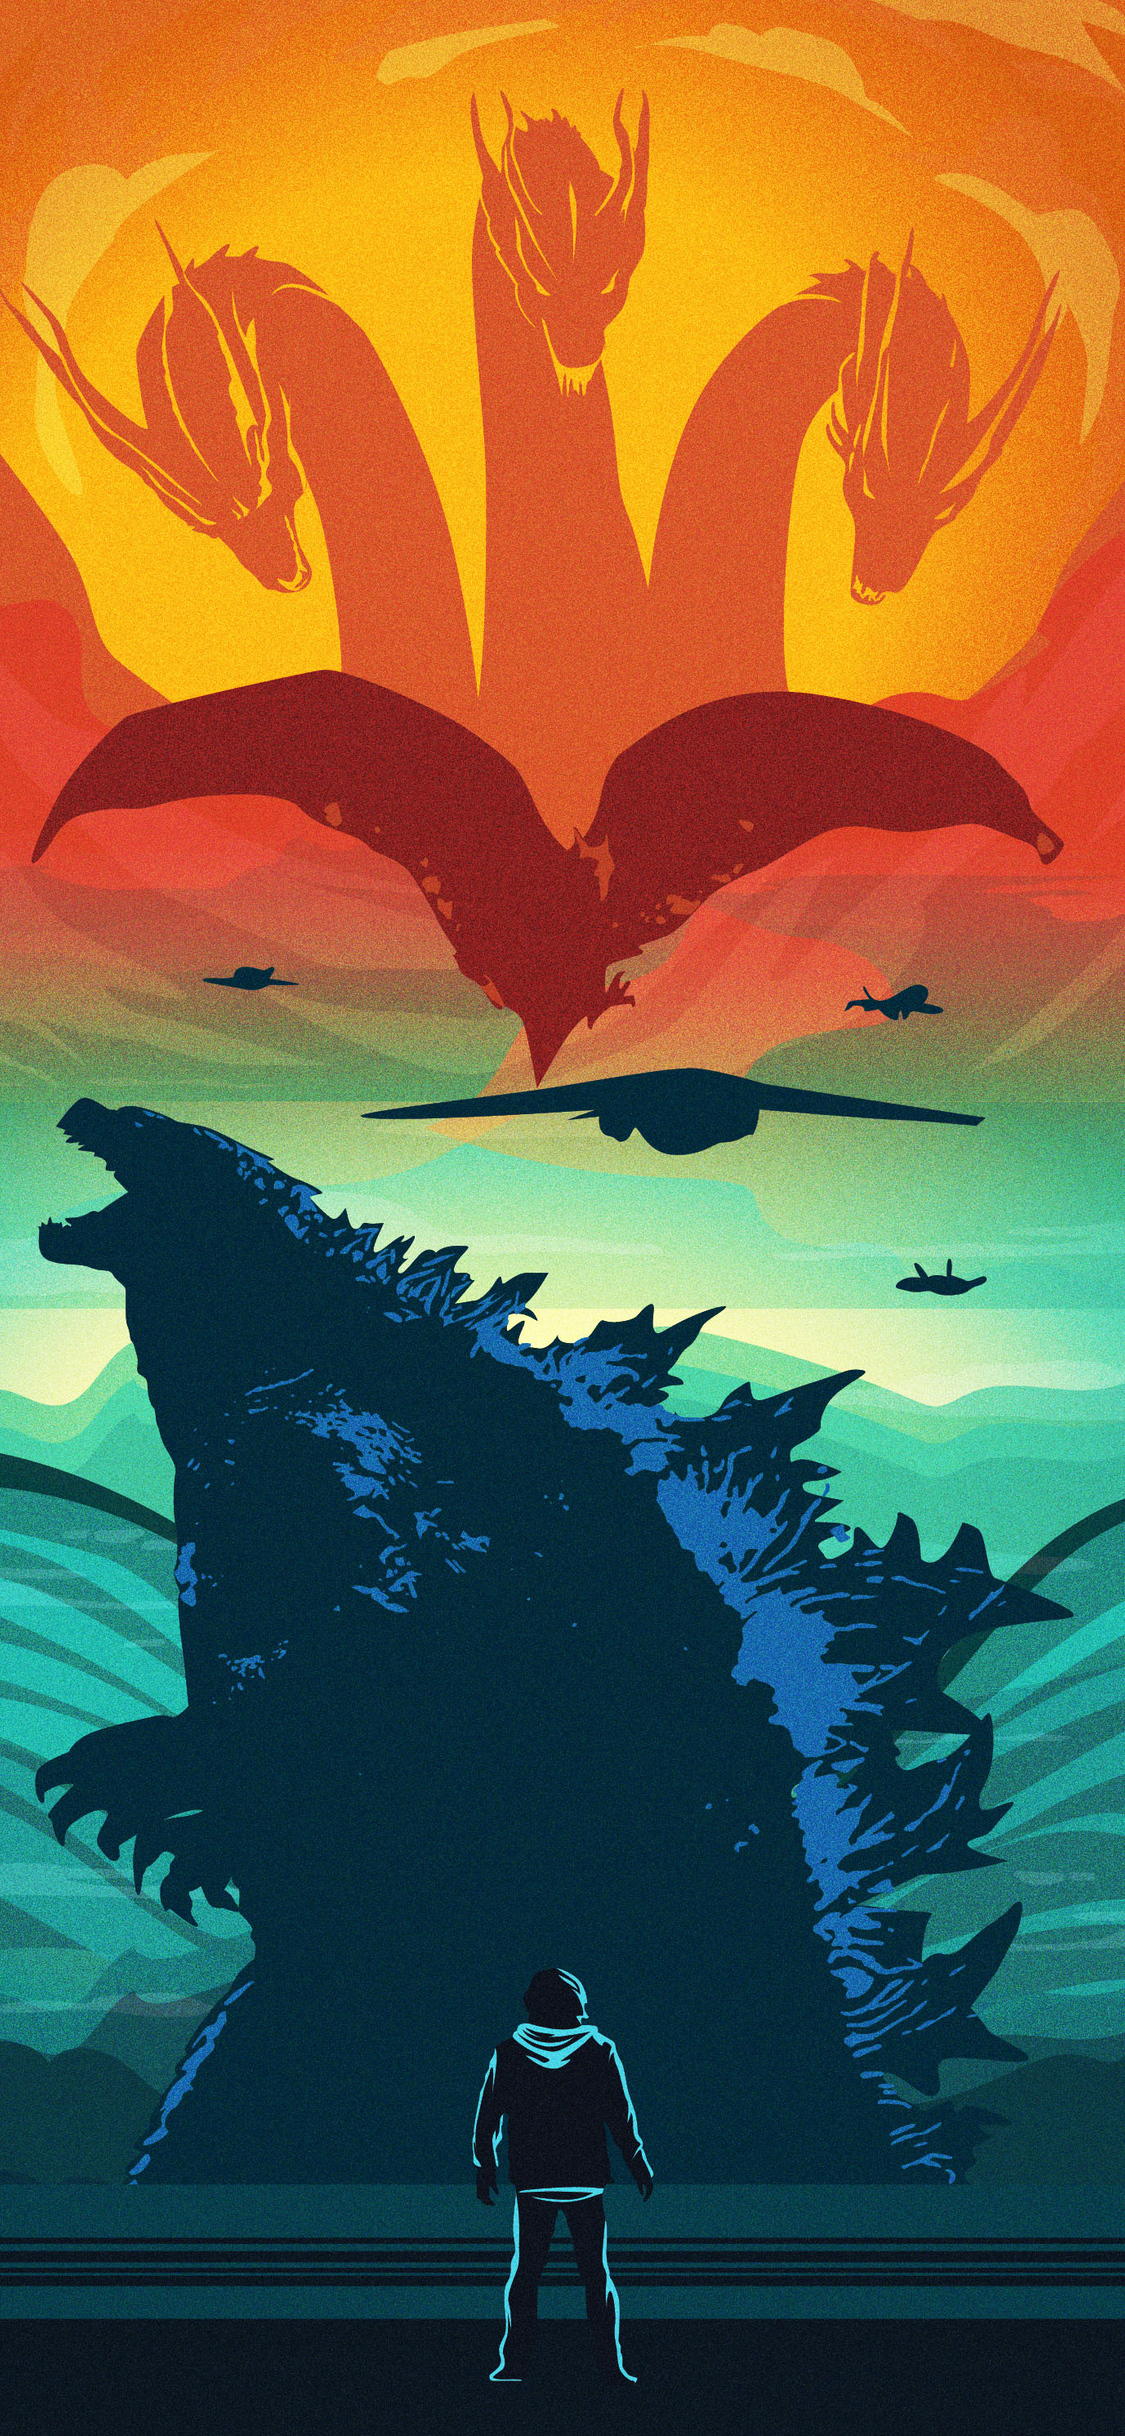 2019 godzilla king of the monsters 5k iPhone X Wallpapers Free Download